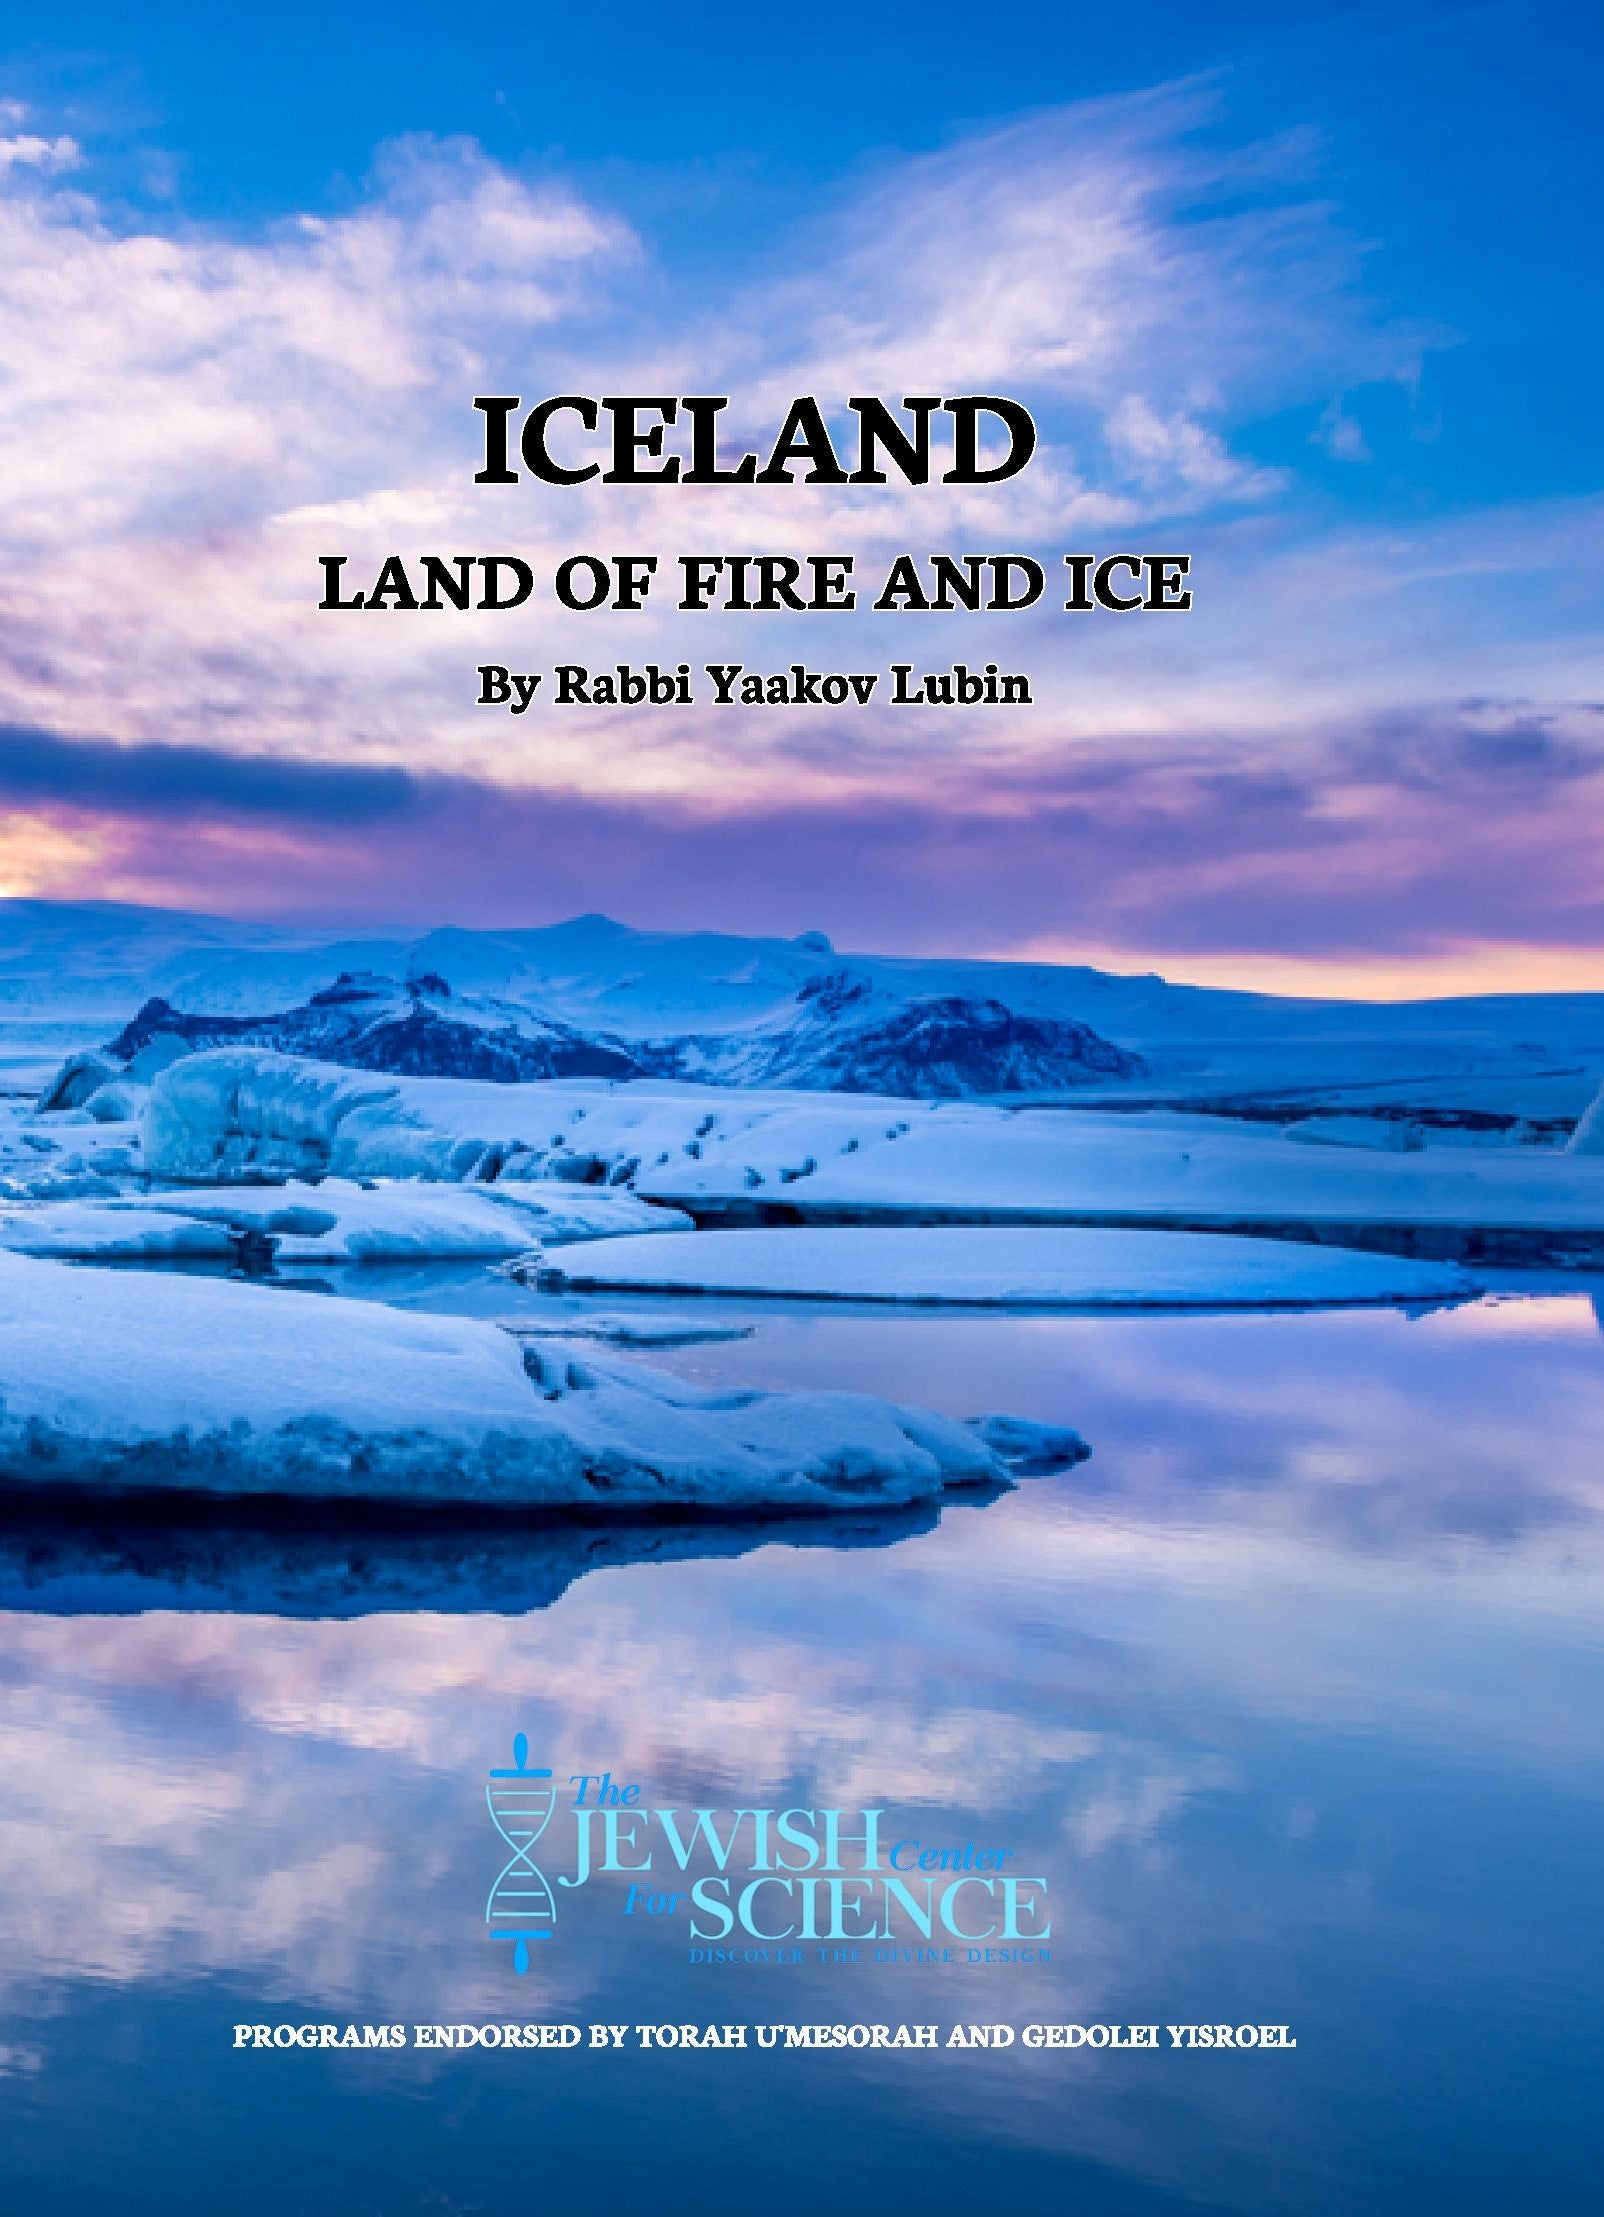 Borchi Nafshi Series - Iceland “Land of Fire and Ice” (Video)